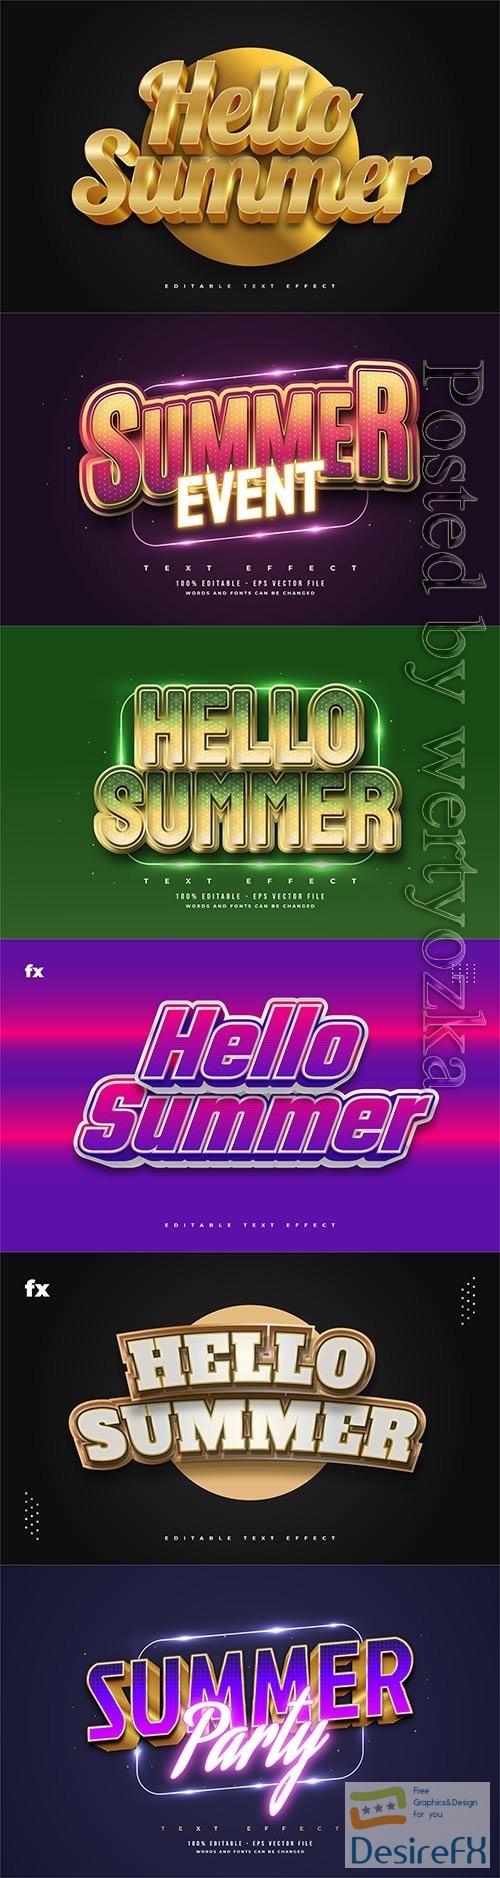 Hello summer 3d editable text style effect in vector vol 6